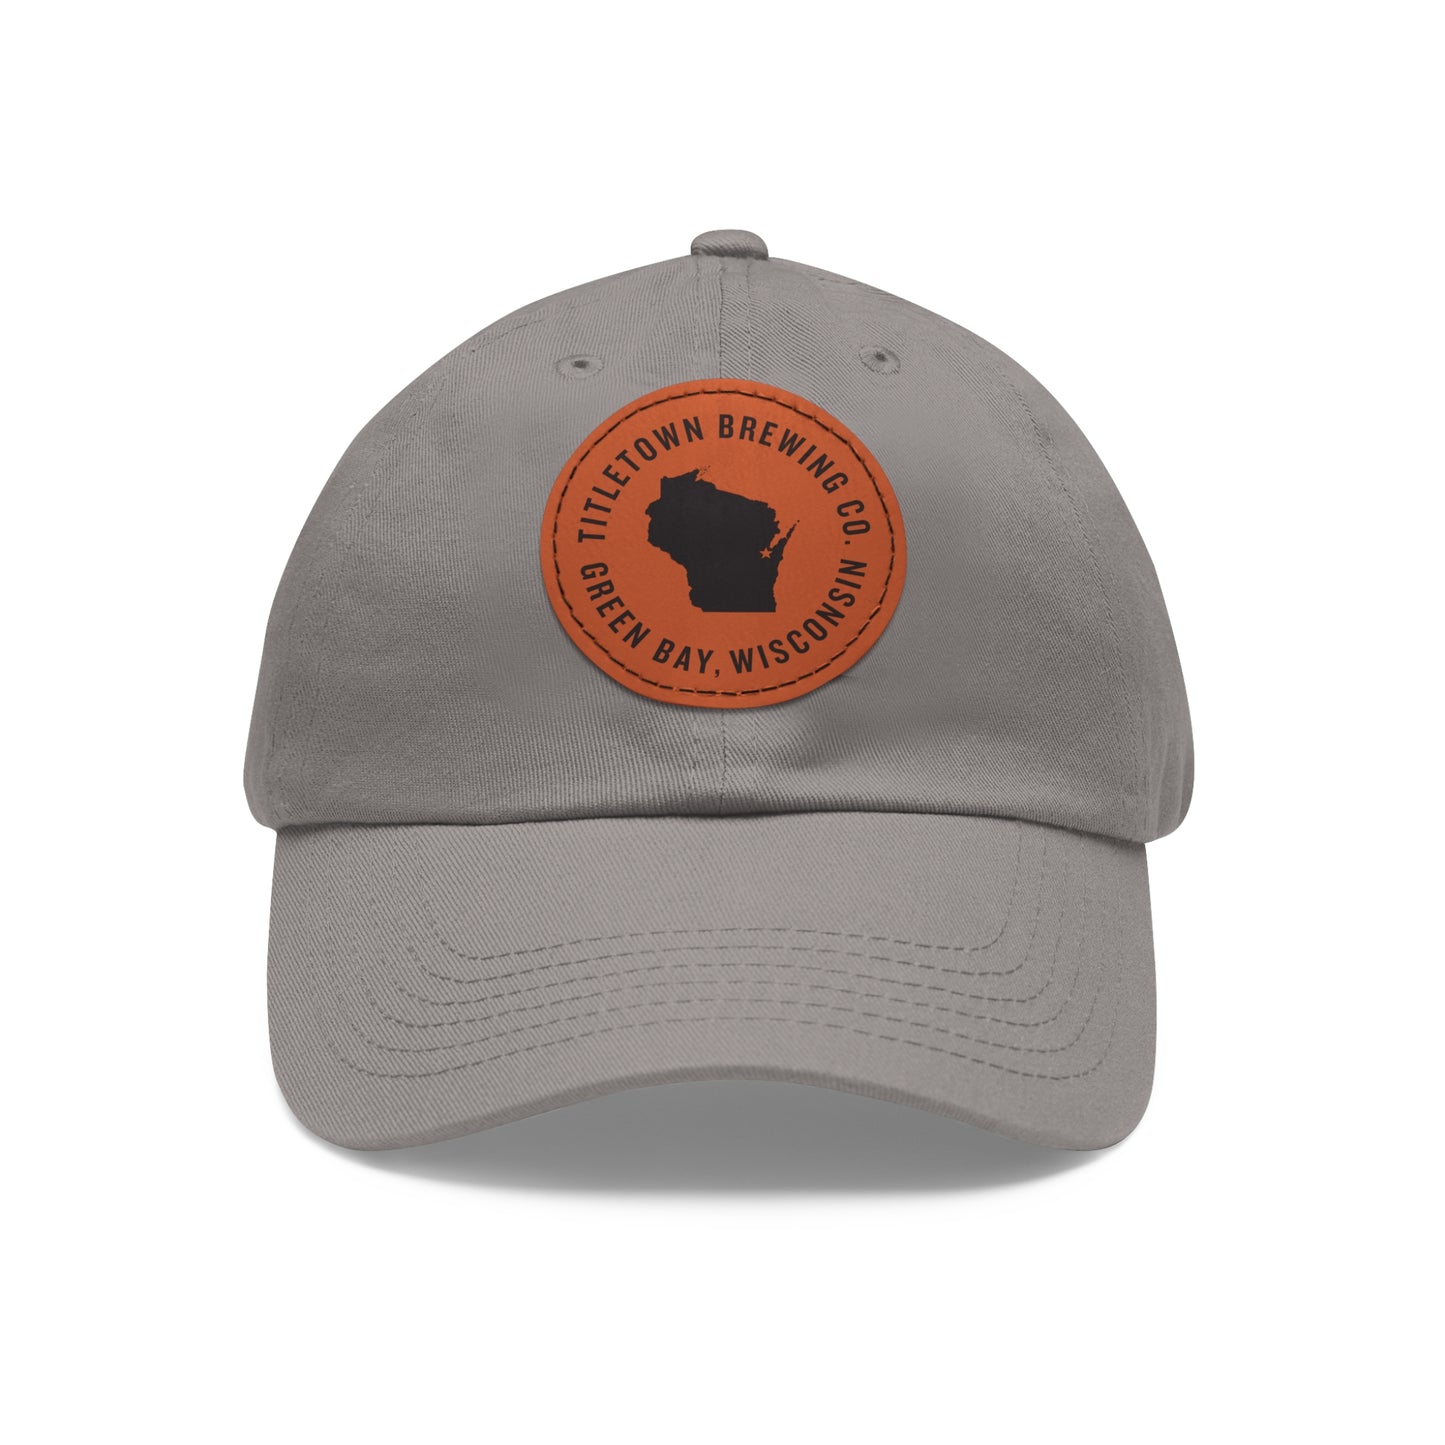 Titletown Brewing Co. Wisconsin Dad Hat with Leather Patch (Round)